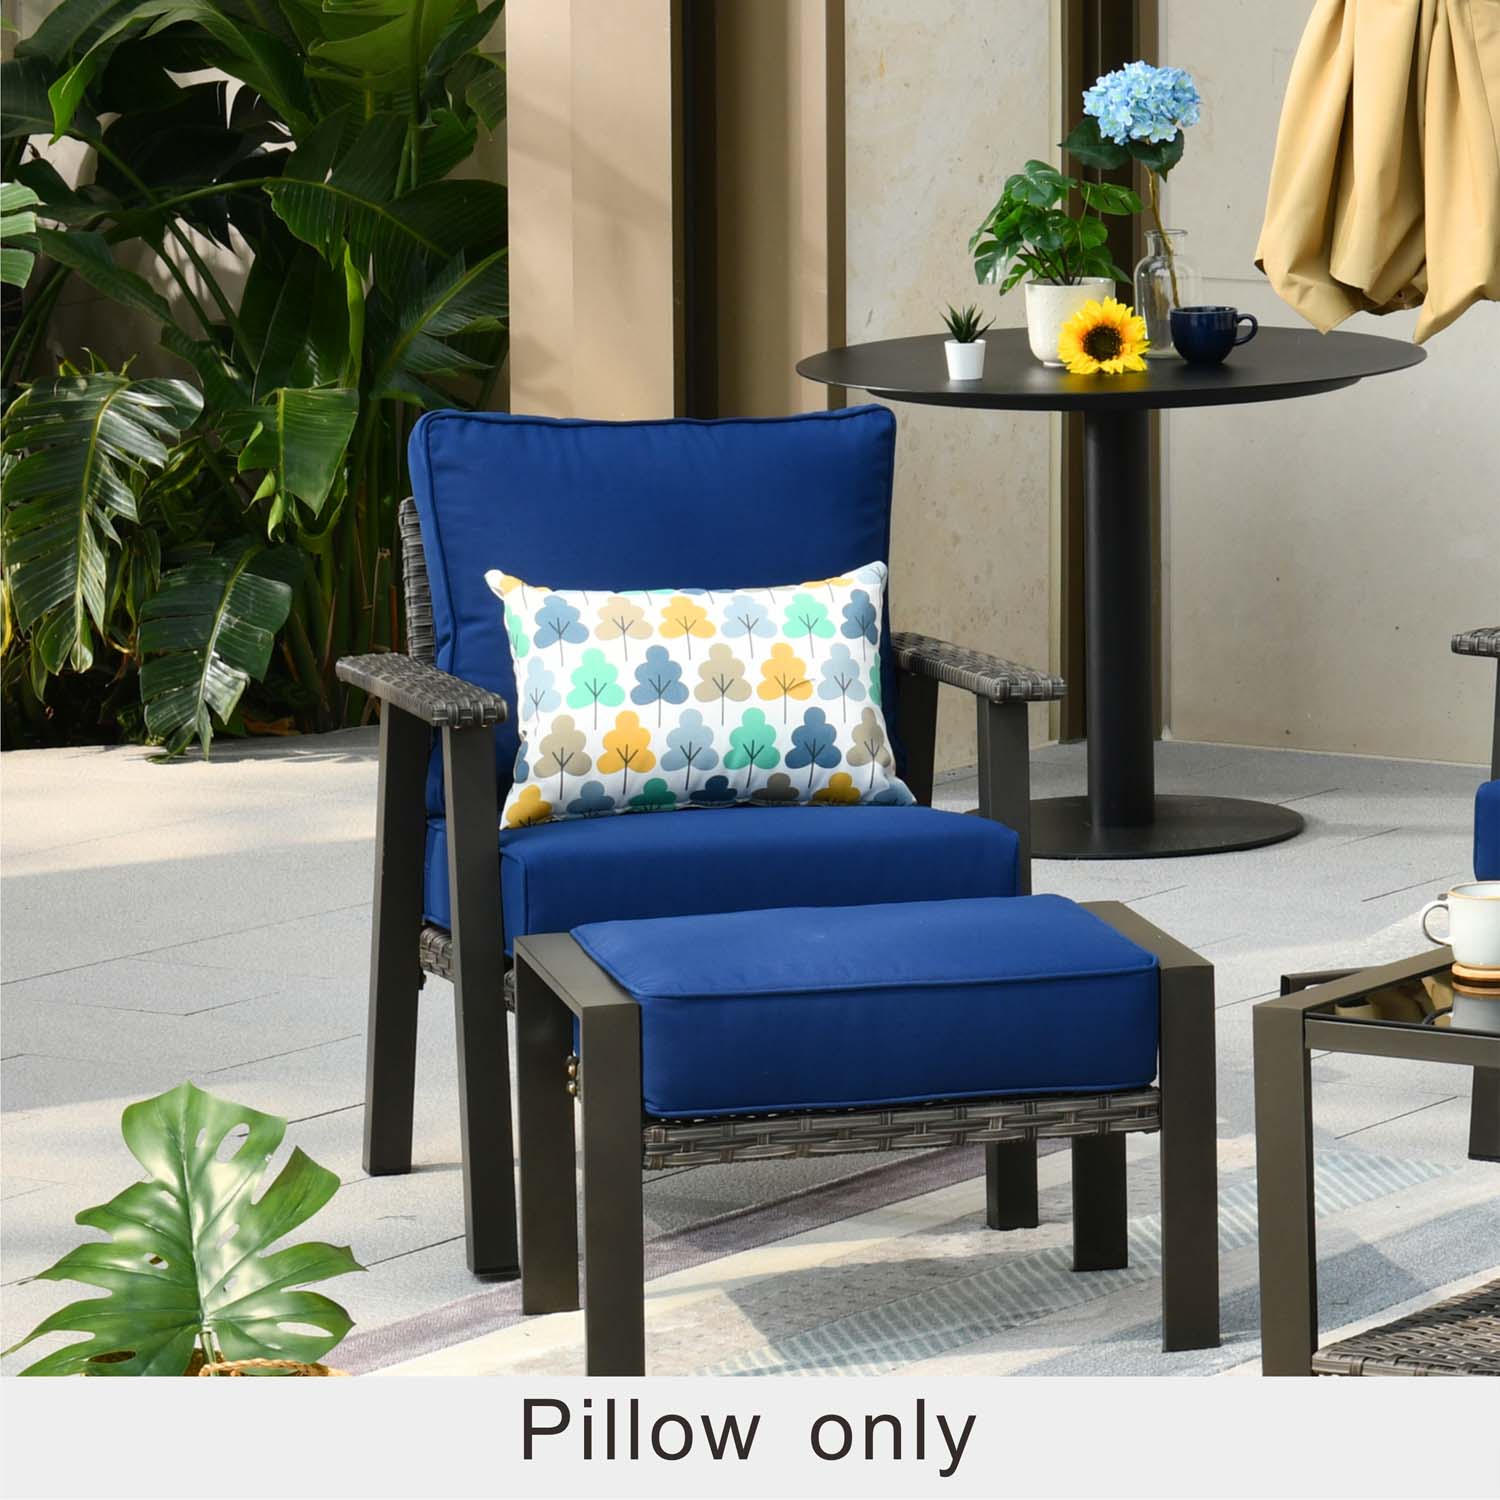 patio cushion replacements